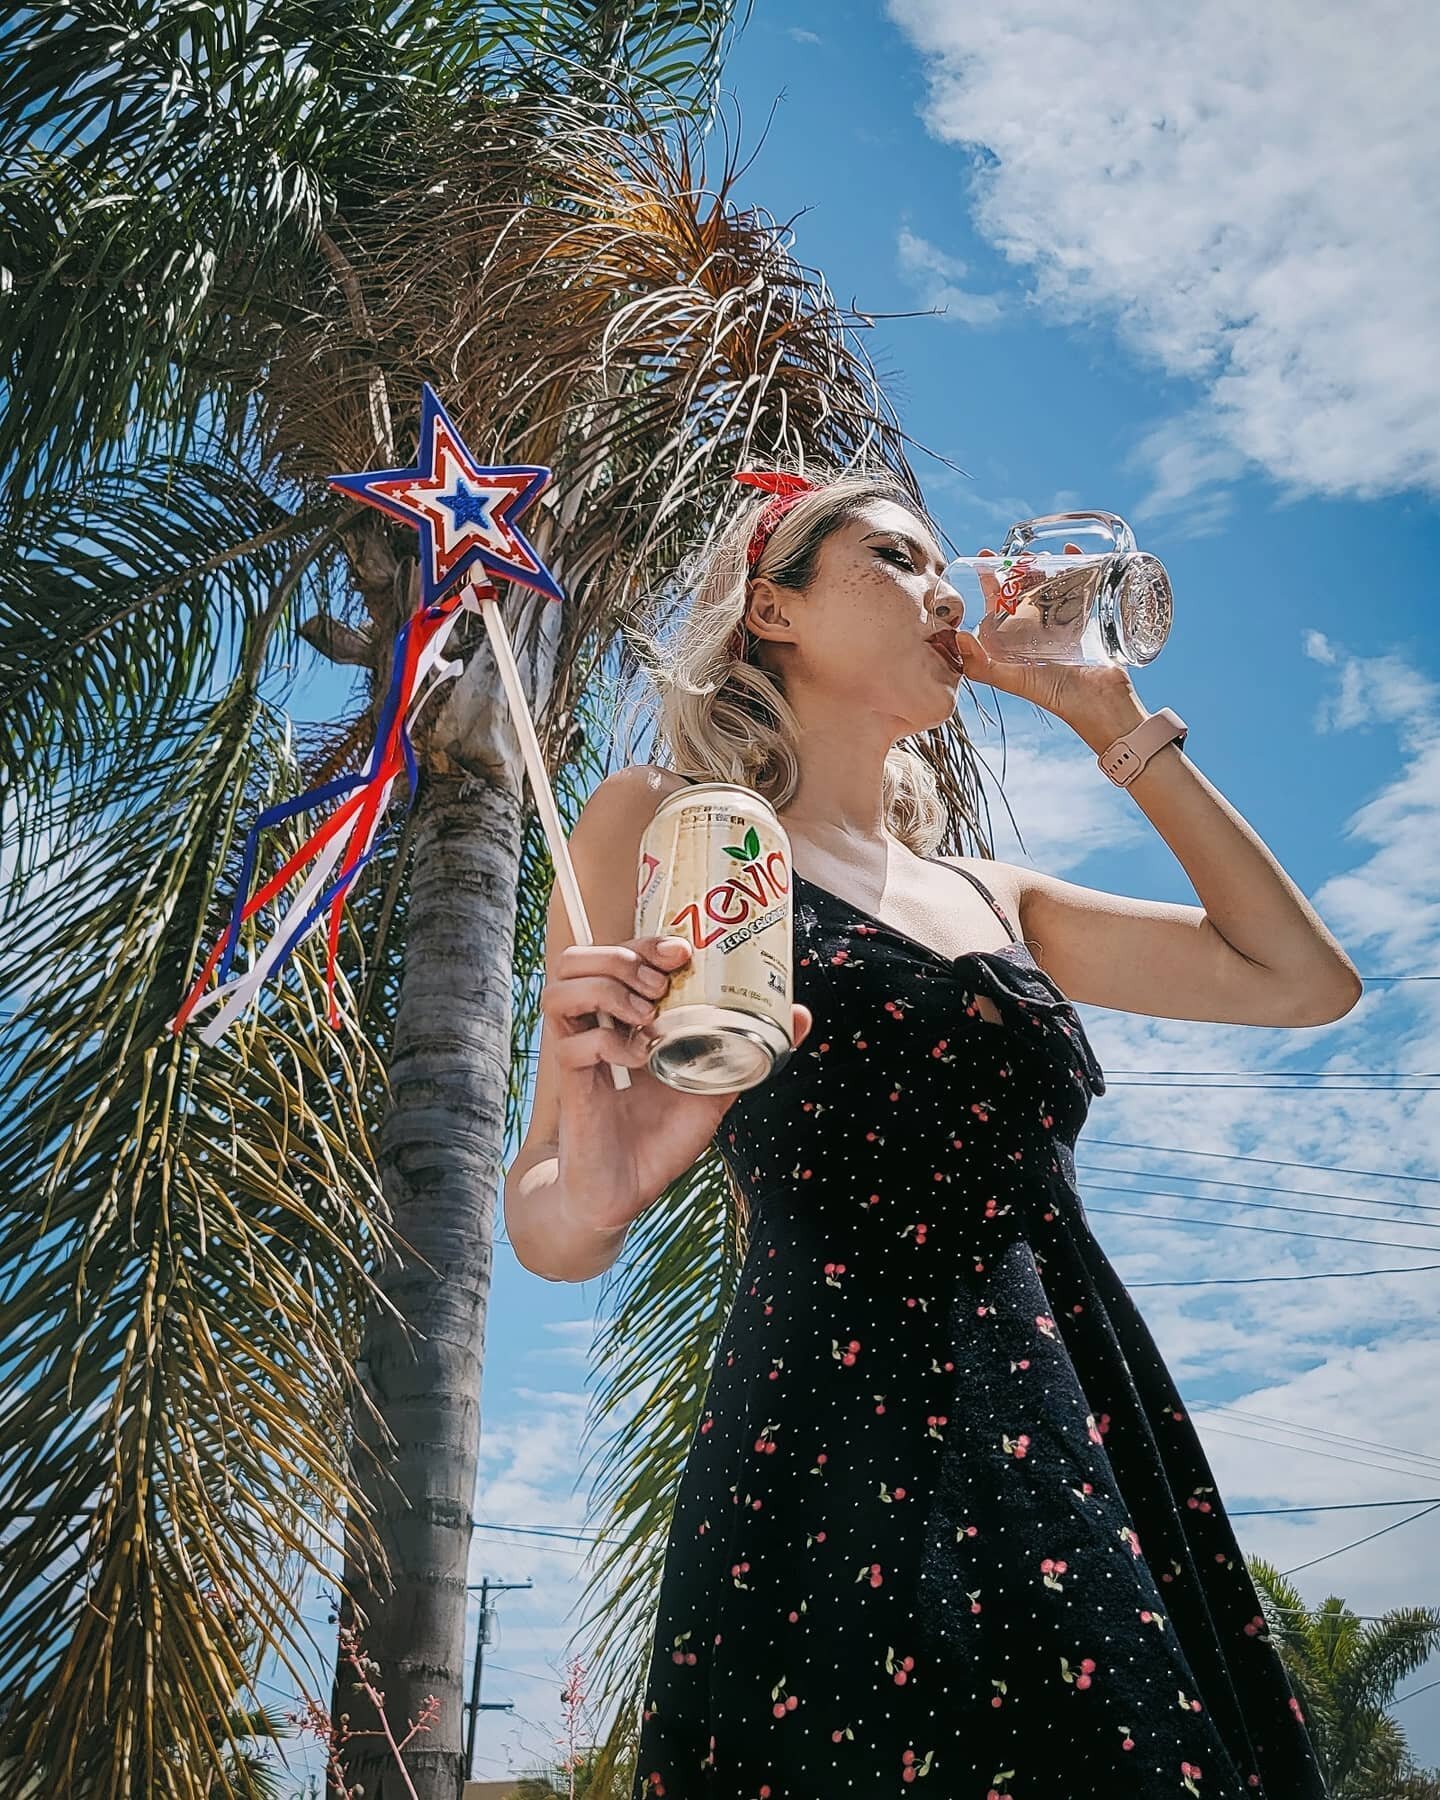 Nothing tastes better than a cold, frosted mug with @Zevia Creamy Root Beer on a hot summer day! Whether you are simply enjoying Creamy Root Beer or indulging in a Creamy Root Beer float, this delicious drink is perfect for celebrating the 4th of Jul